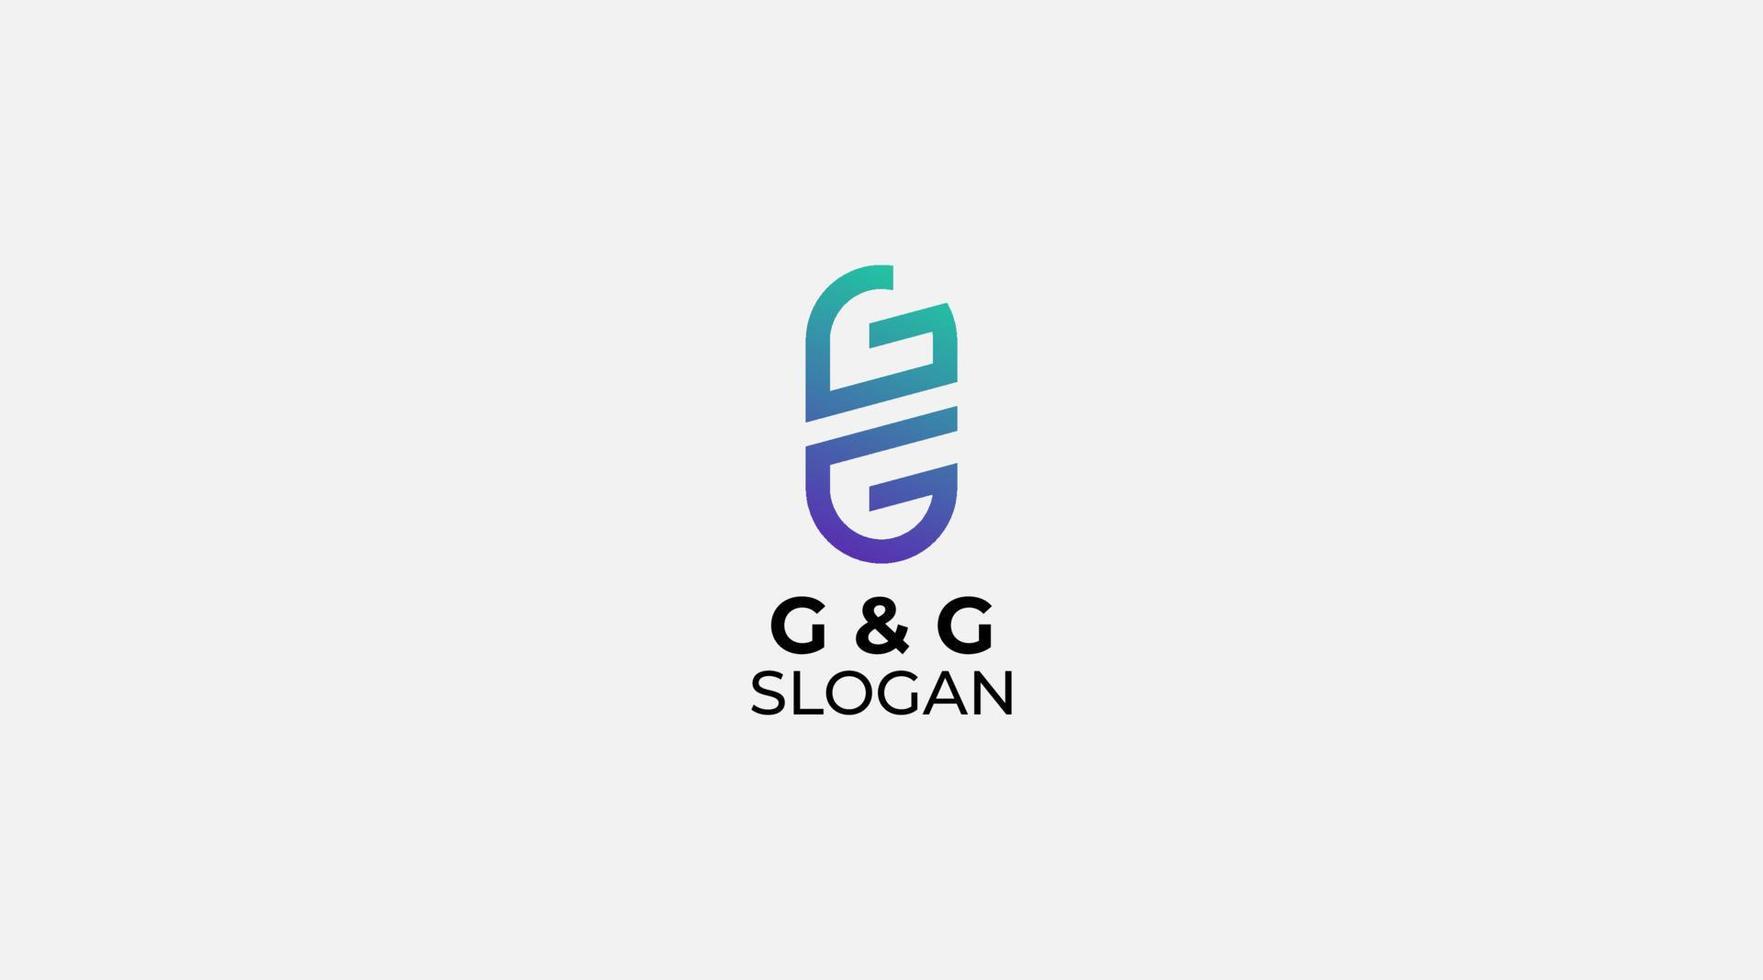 Letters G G, G G logo design icon vector template